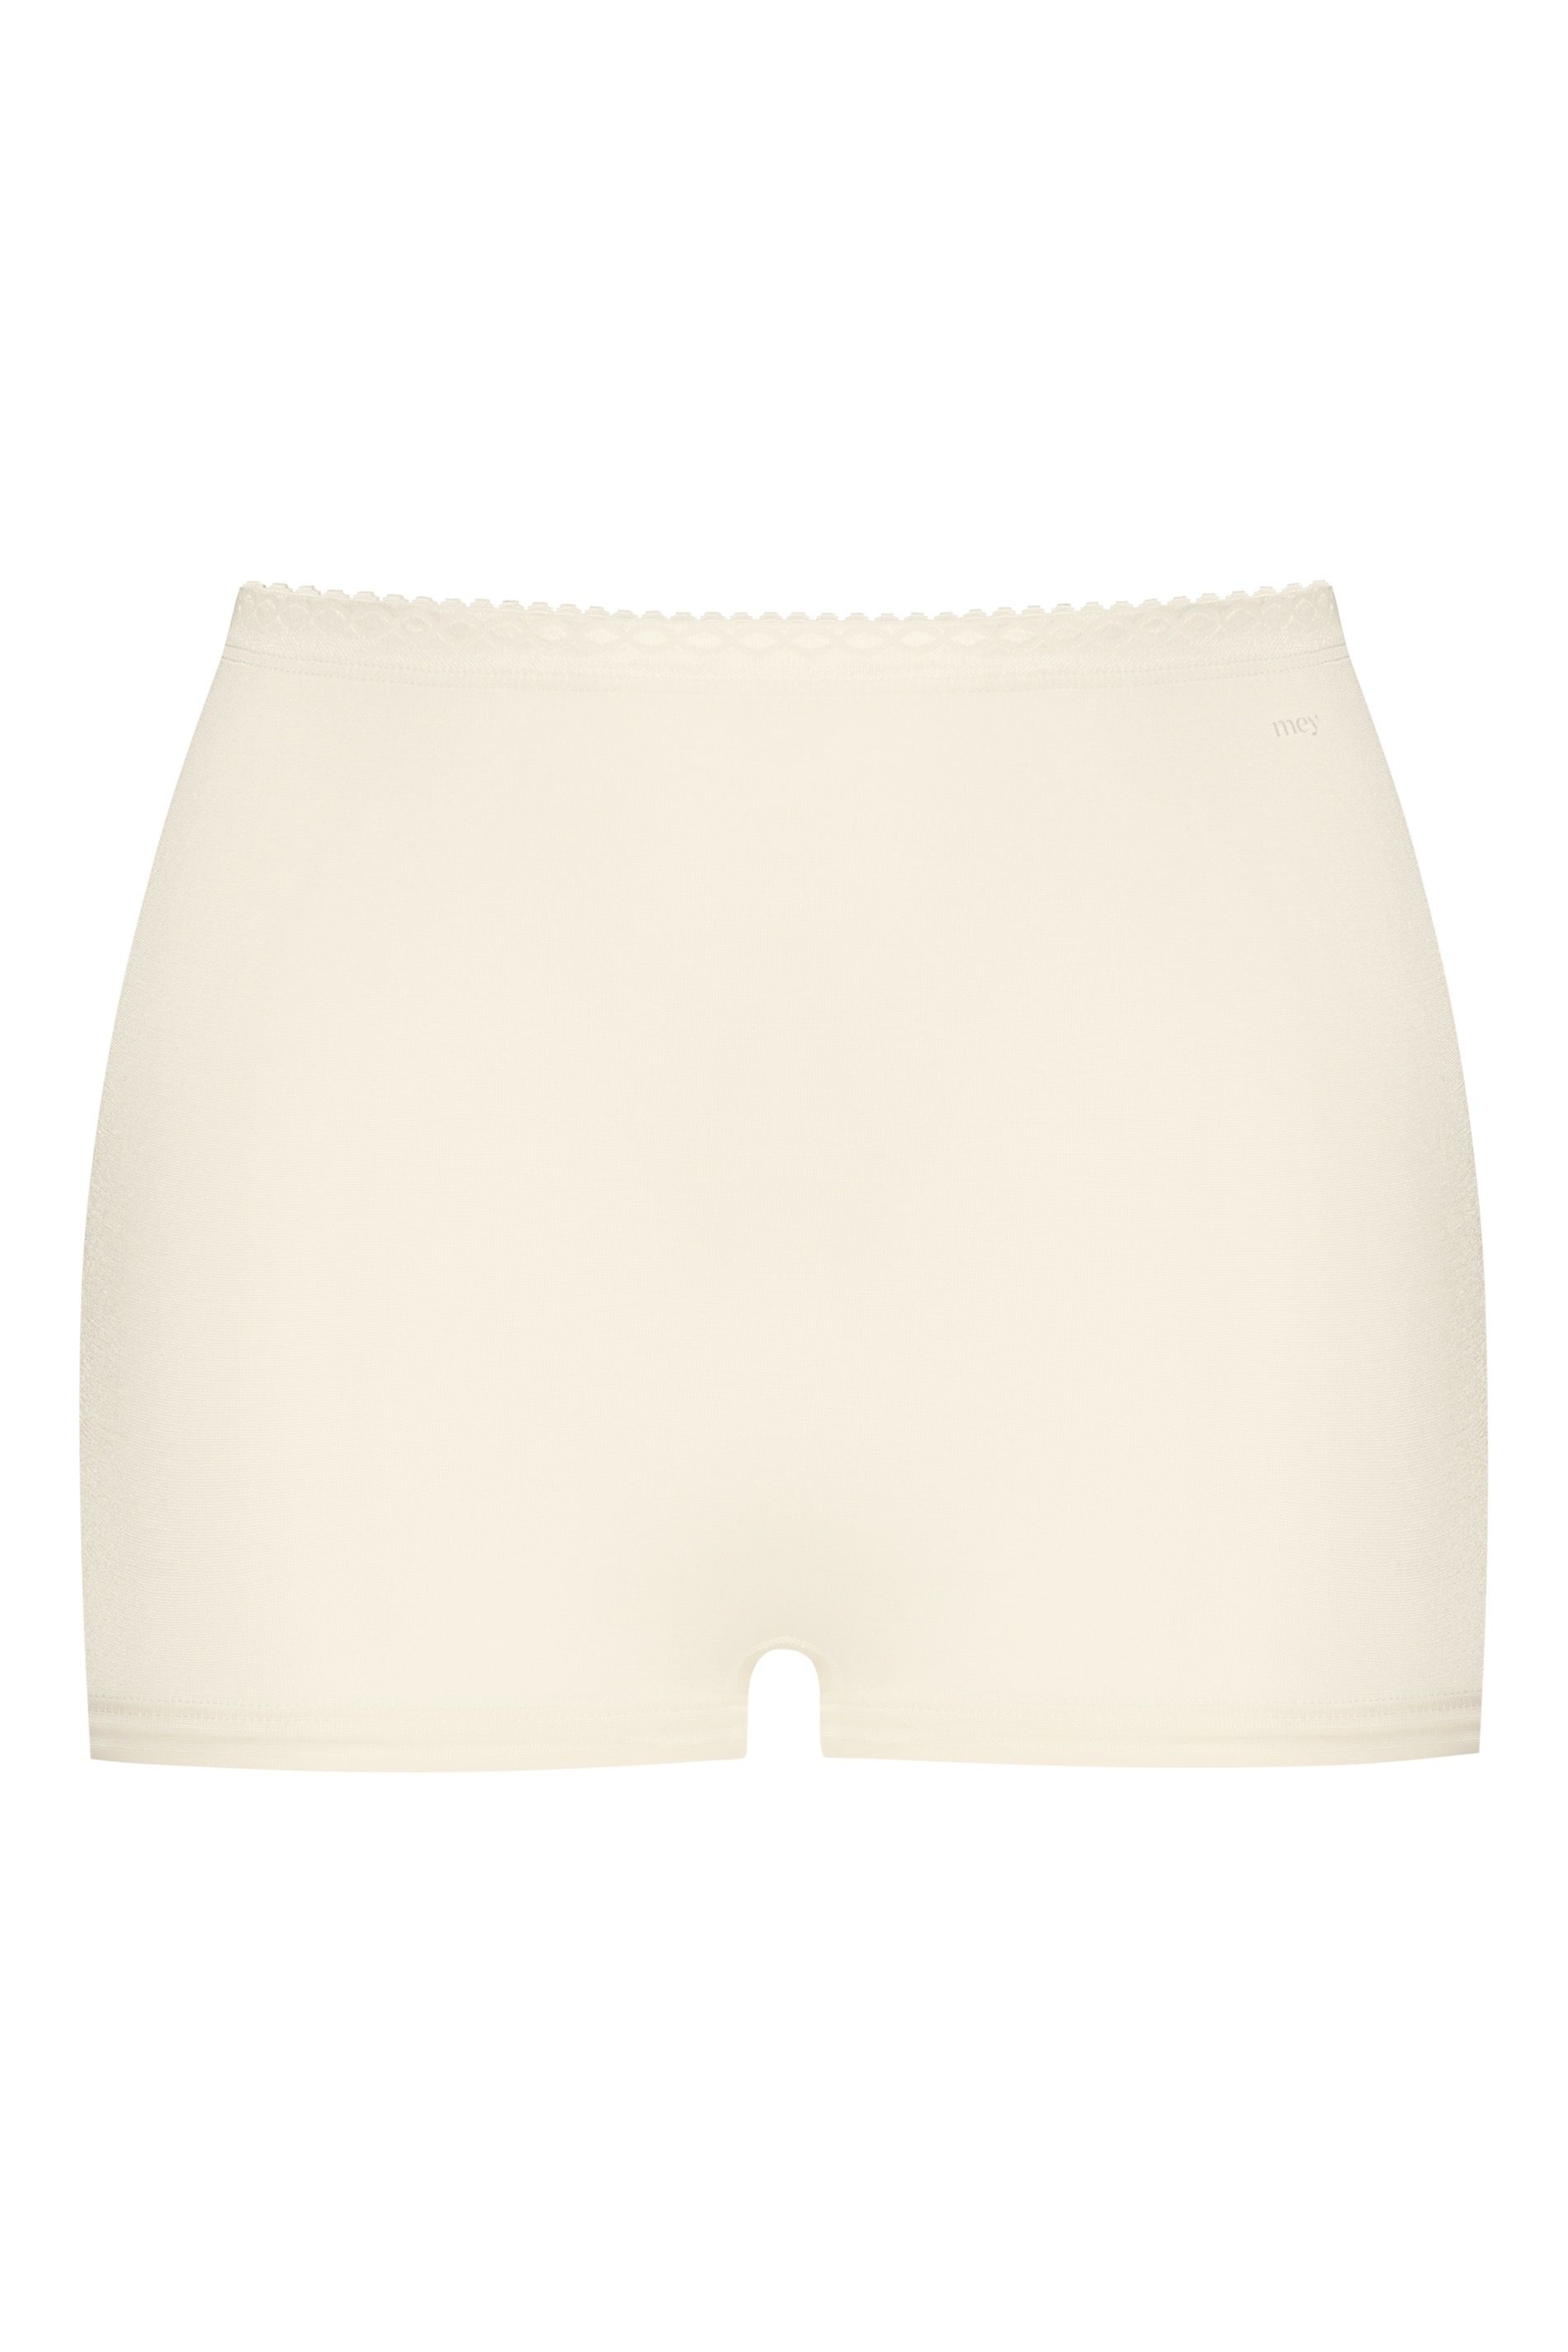 Boxers Oyster White Serie Mey Lights Cut Out | mey®